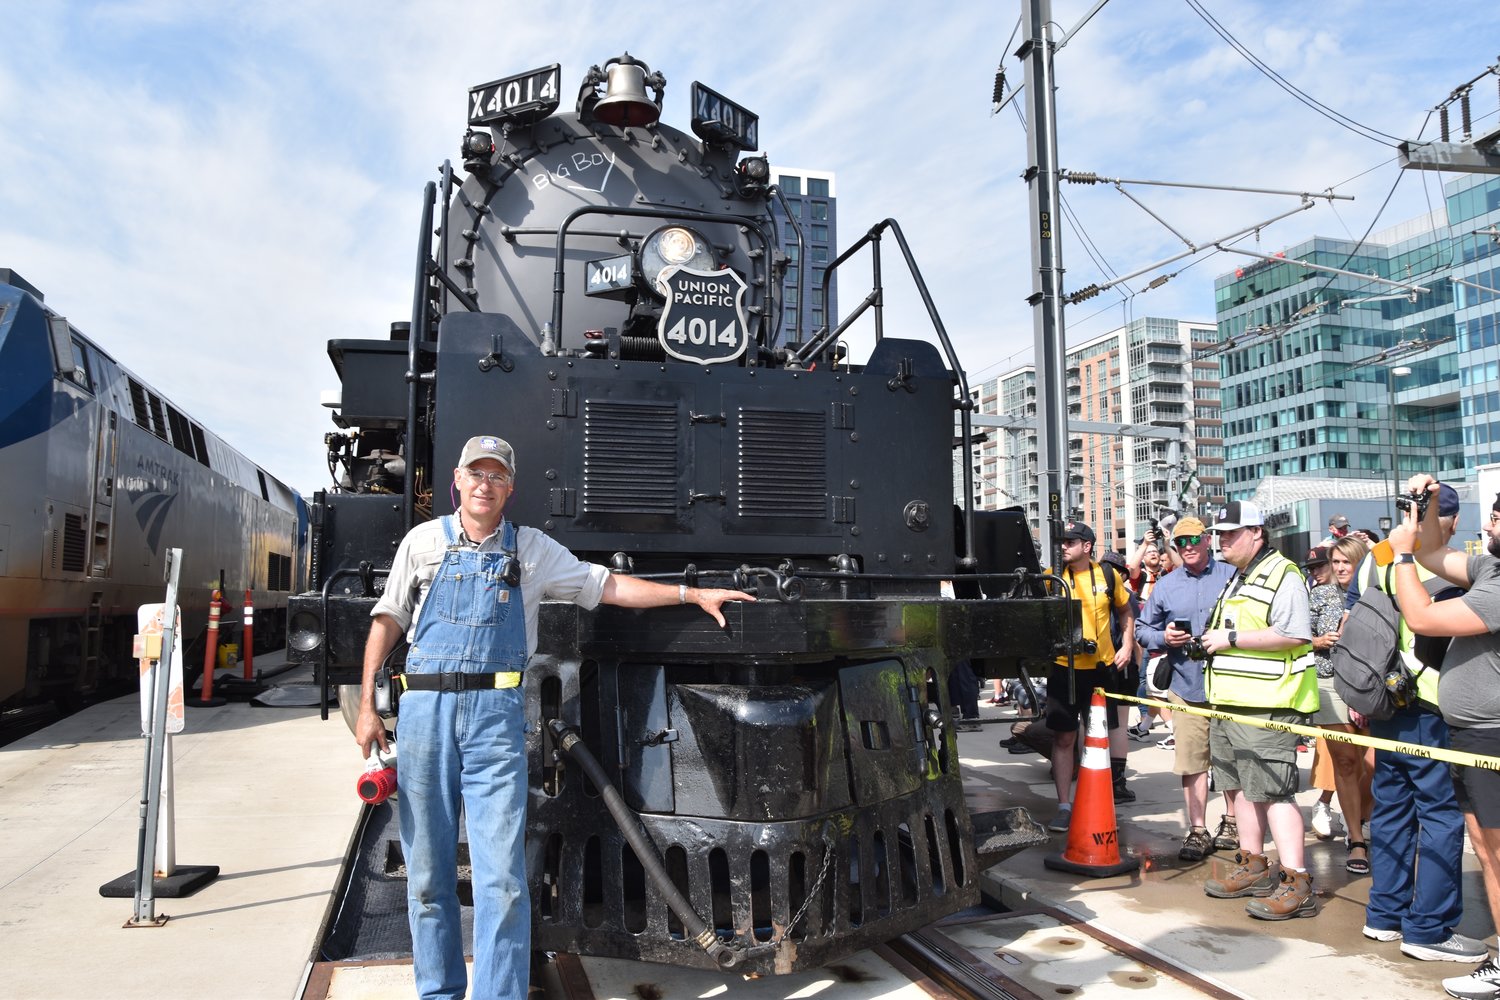 Ed Dickens is the engineer that operates Big Boy. Crowds came to see the massive train at Union Station.